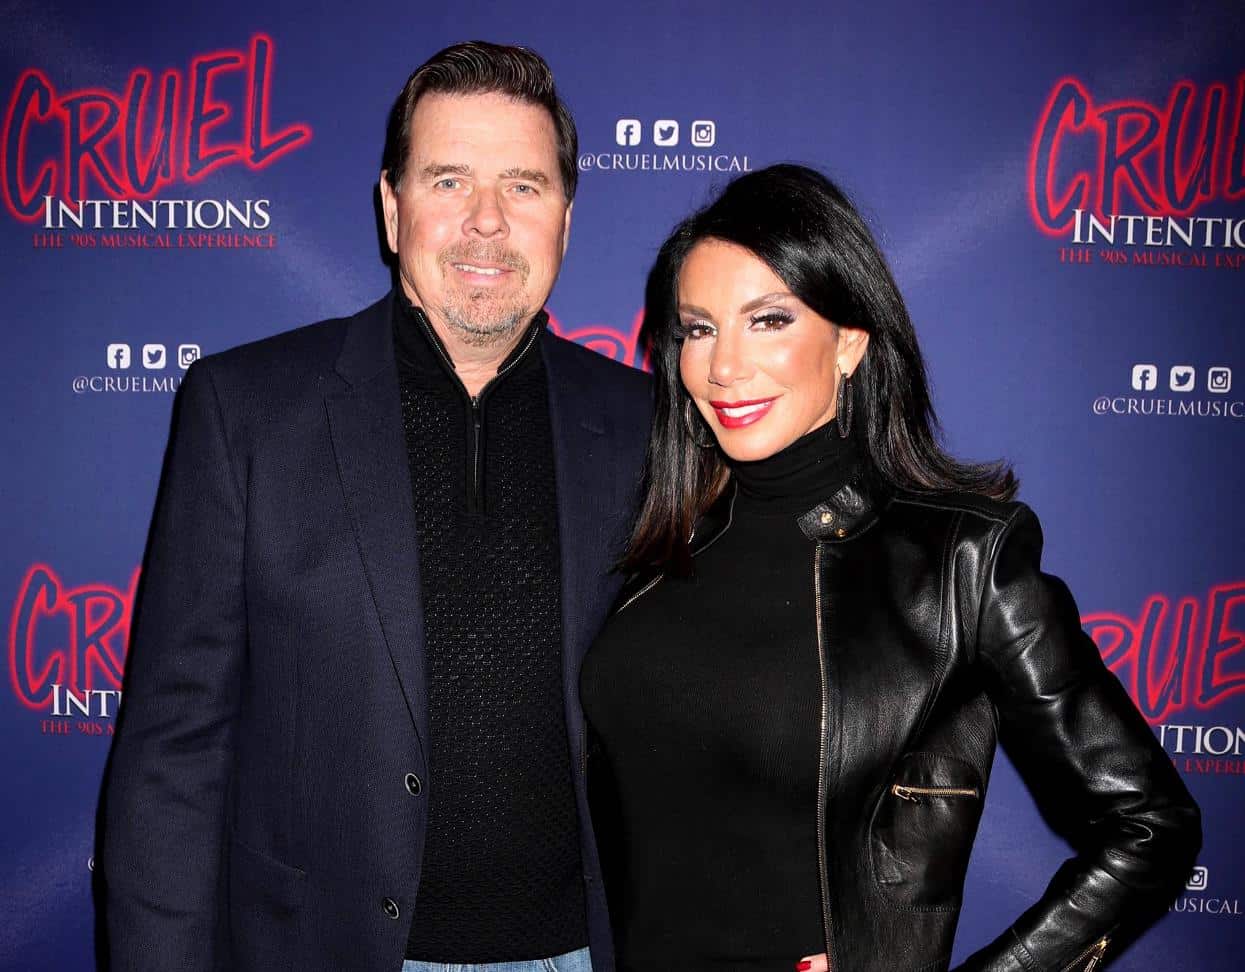 RHONJ's Danielle Staub and Estranged Husband Marty Caffrey List New Jersey Home for $2.195 Million After Messy Split